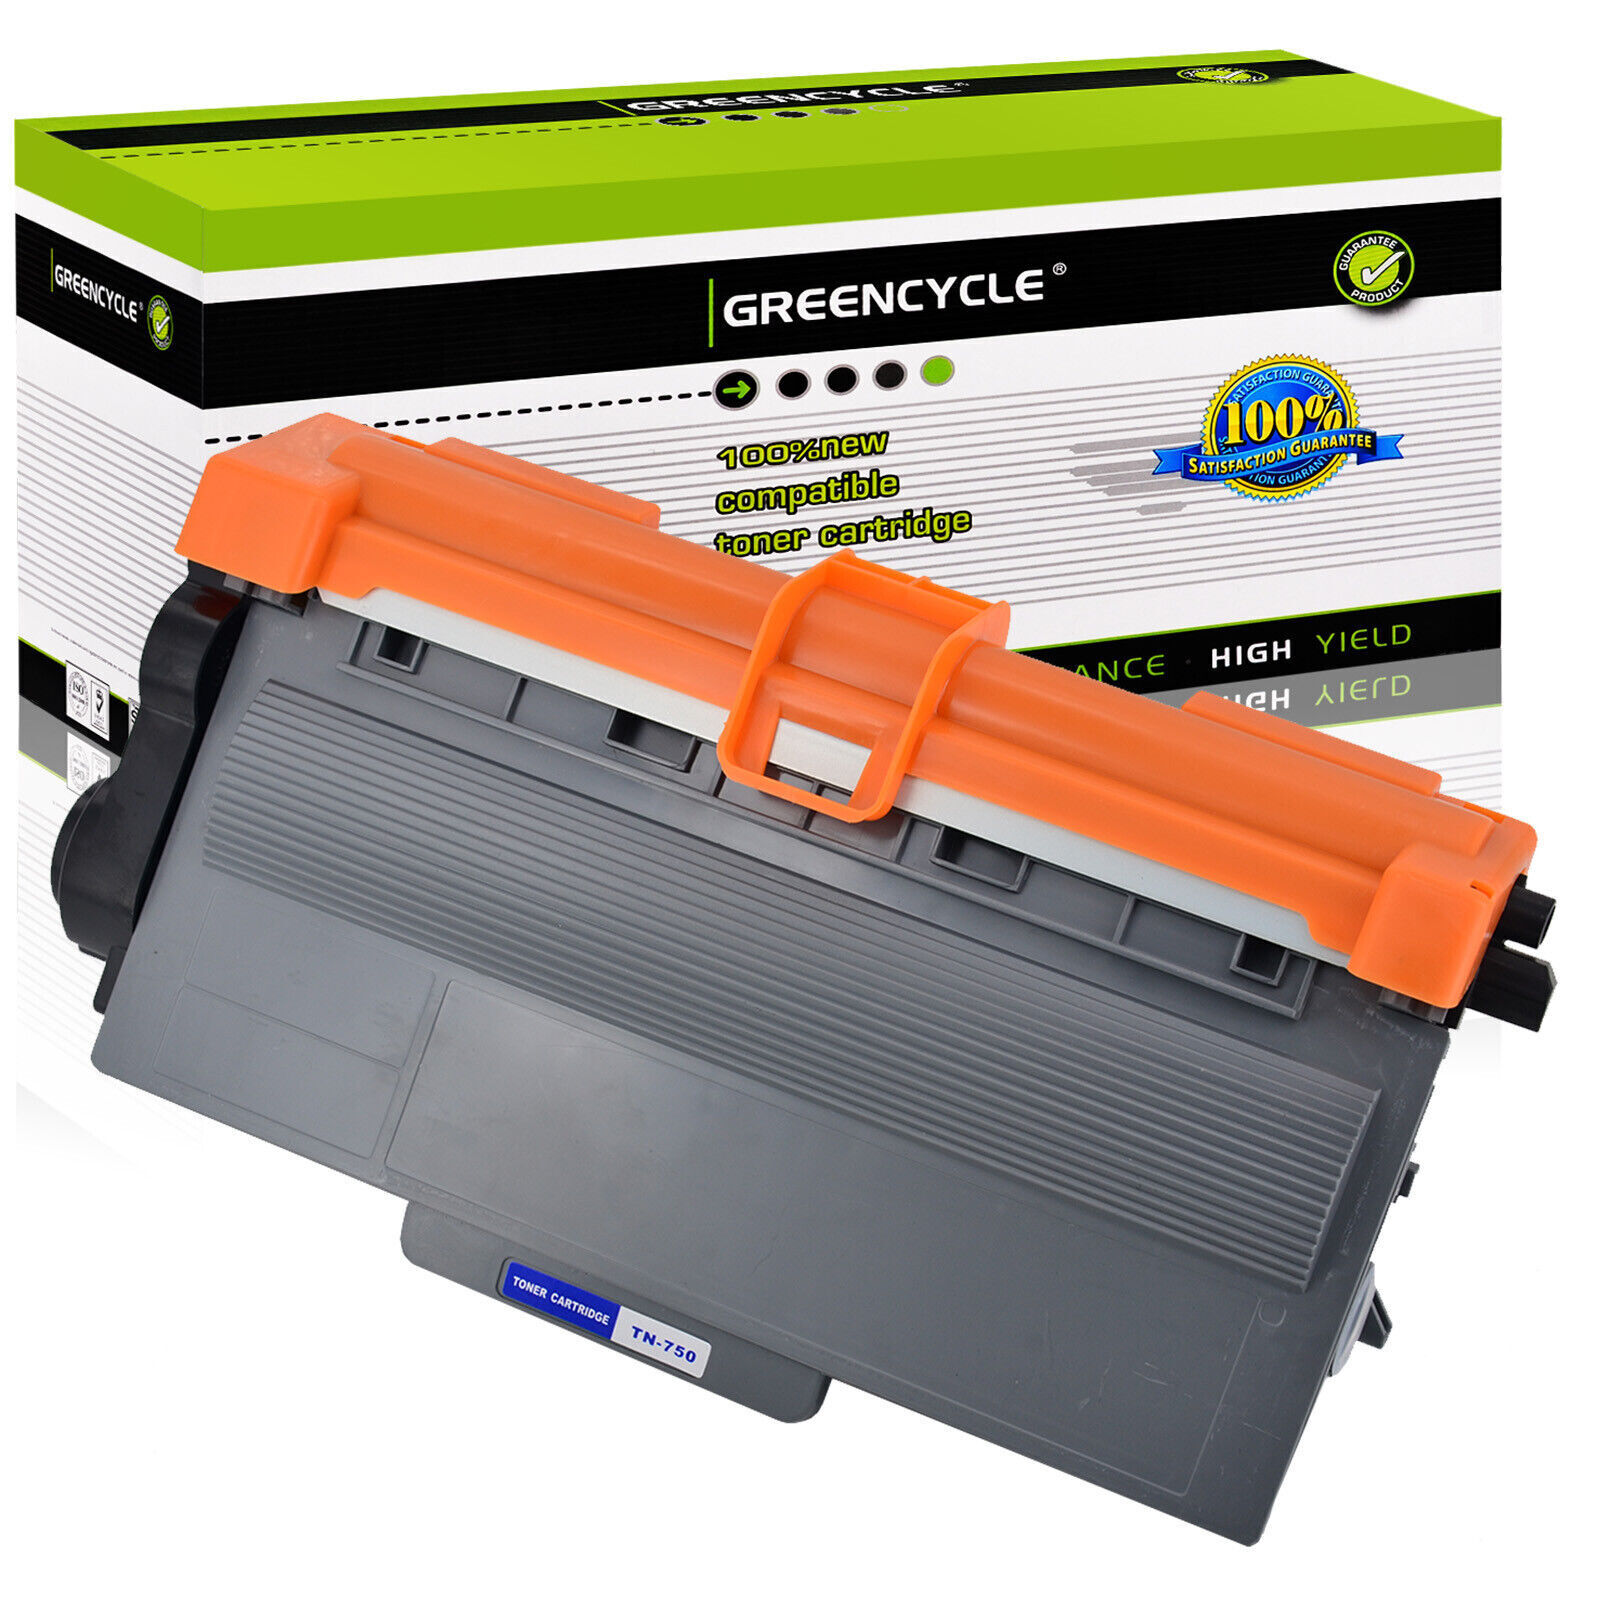 TN720 TN750 Toner Cartridge Compatible with Brother HL5450DN HL5470DW DCP8110DN